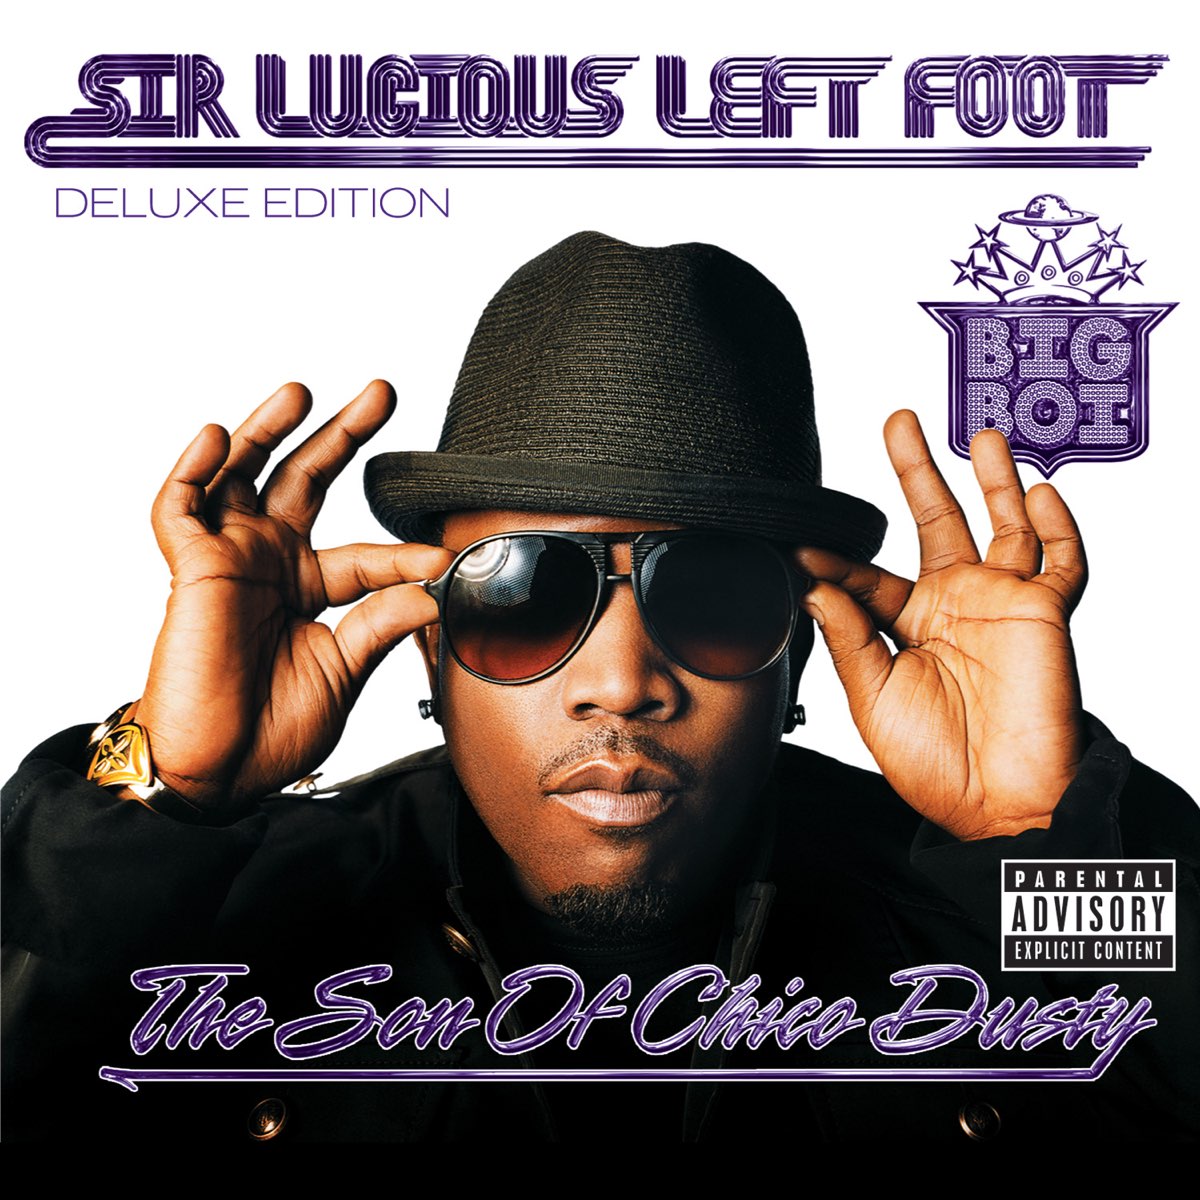 ‎sir Lucious Left Foot The Son Of Chico Dusty Deluxe Edition Album By Big Boi Apple Music